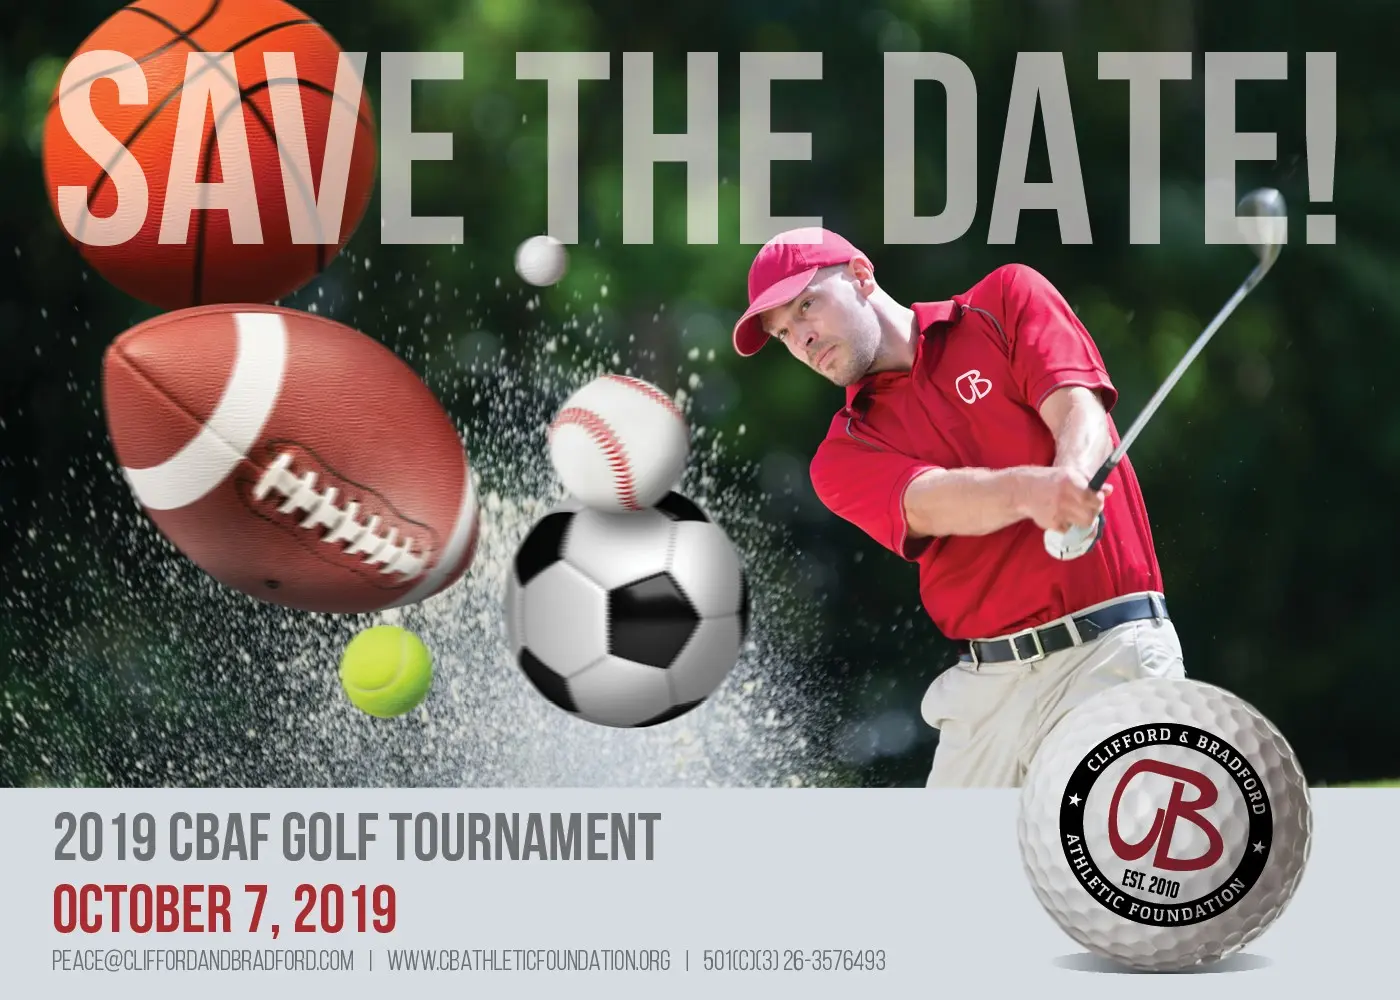 Clifford & Bradford Athletic Foundation golf tournament save the date